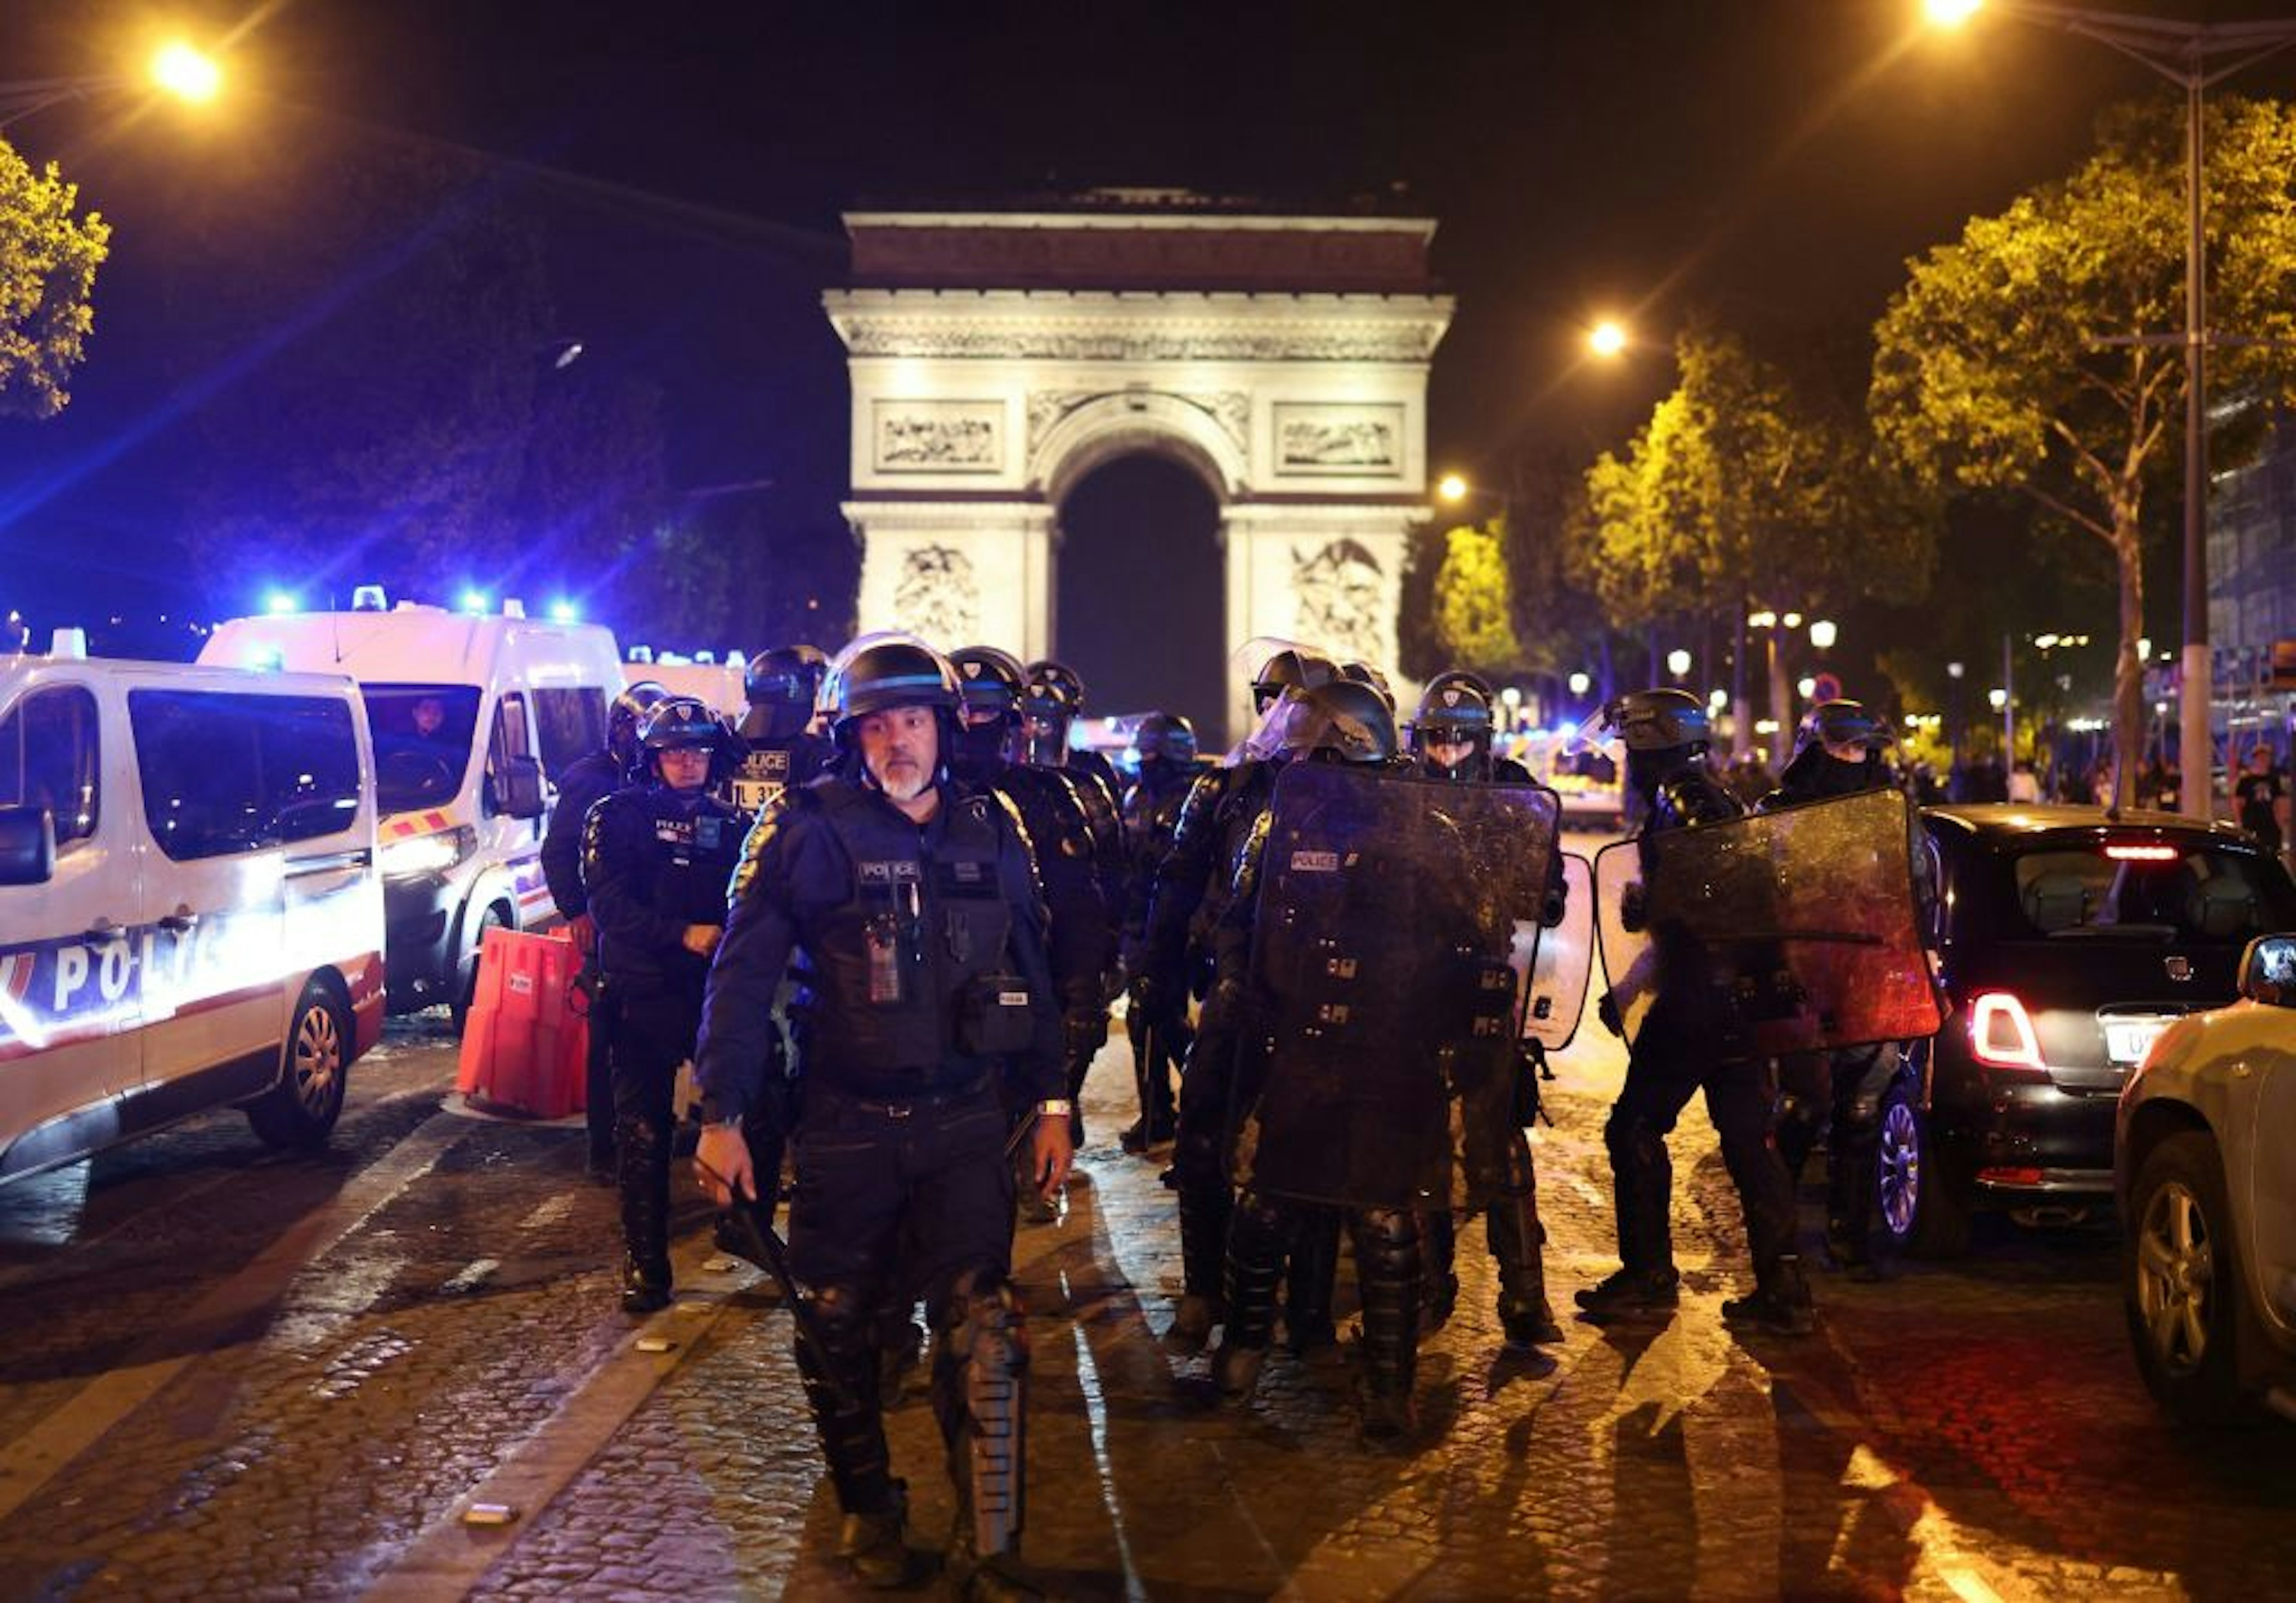 TOPSHOT - French police officers patrol in front of the Arc de Triomphe in the Champs Elysees area of Paris on July 1, 2023, five days after a 17-year-old man was killed by police in Nanterre, a western suburb of Paris. French police arrested 1311 people nationwide during a fourth consecutive night of rioting over the killing of a teenager by police, the interior ministry said on July 1, 2023. France had deployed 45,000 officers overnight backed by light armoured vehicles and crack police units to quell the violence over the death of 17-year-old Nahel, killed during a traffic stop in a Paris suburb on June 27, 2023. (Photo by CHARLY TRIBALLEAU / AFP) (Photo by CHARLY TRIBALLEAU/AFP via Getty Images)